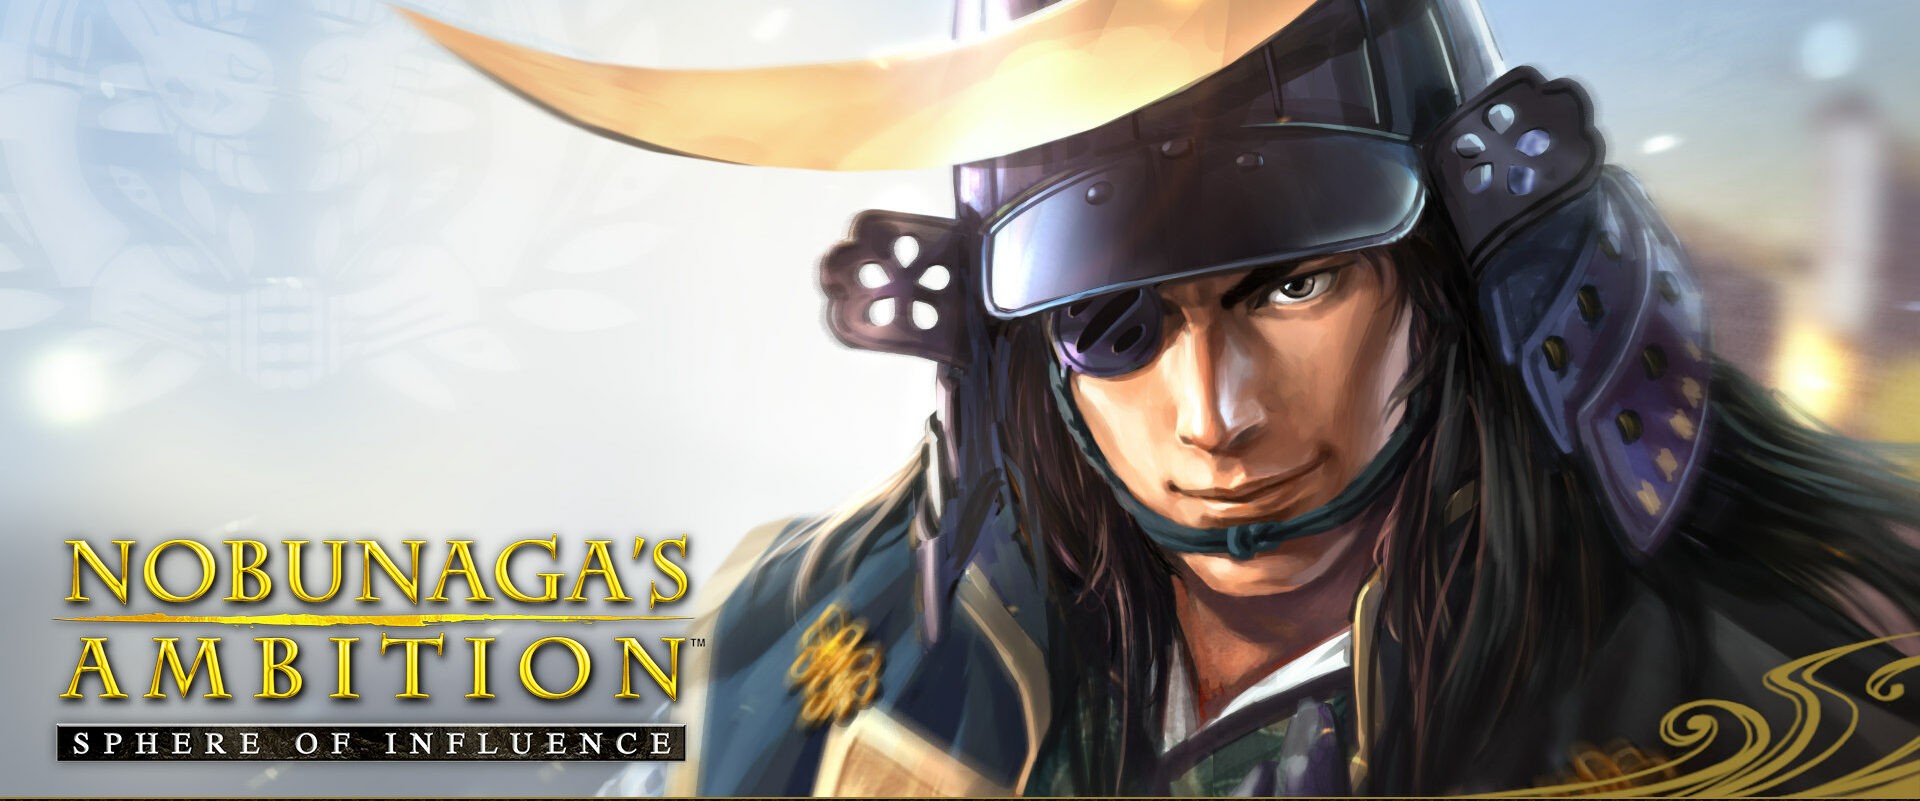 Nobunagas Ambition : Sphere of Influence